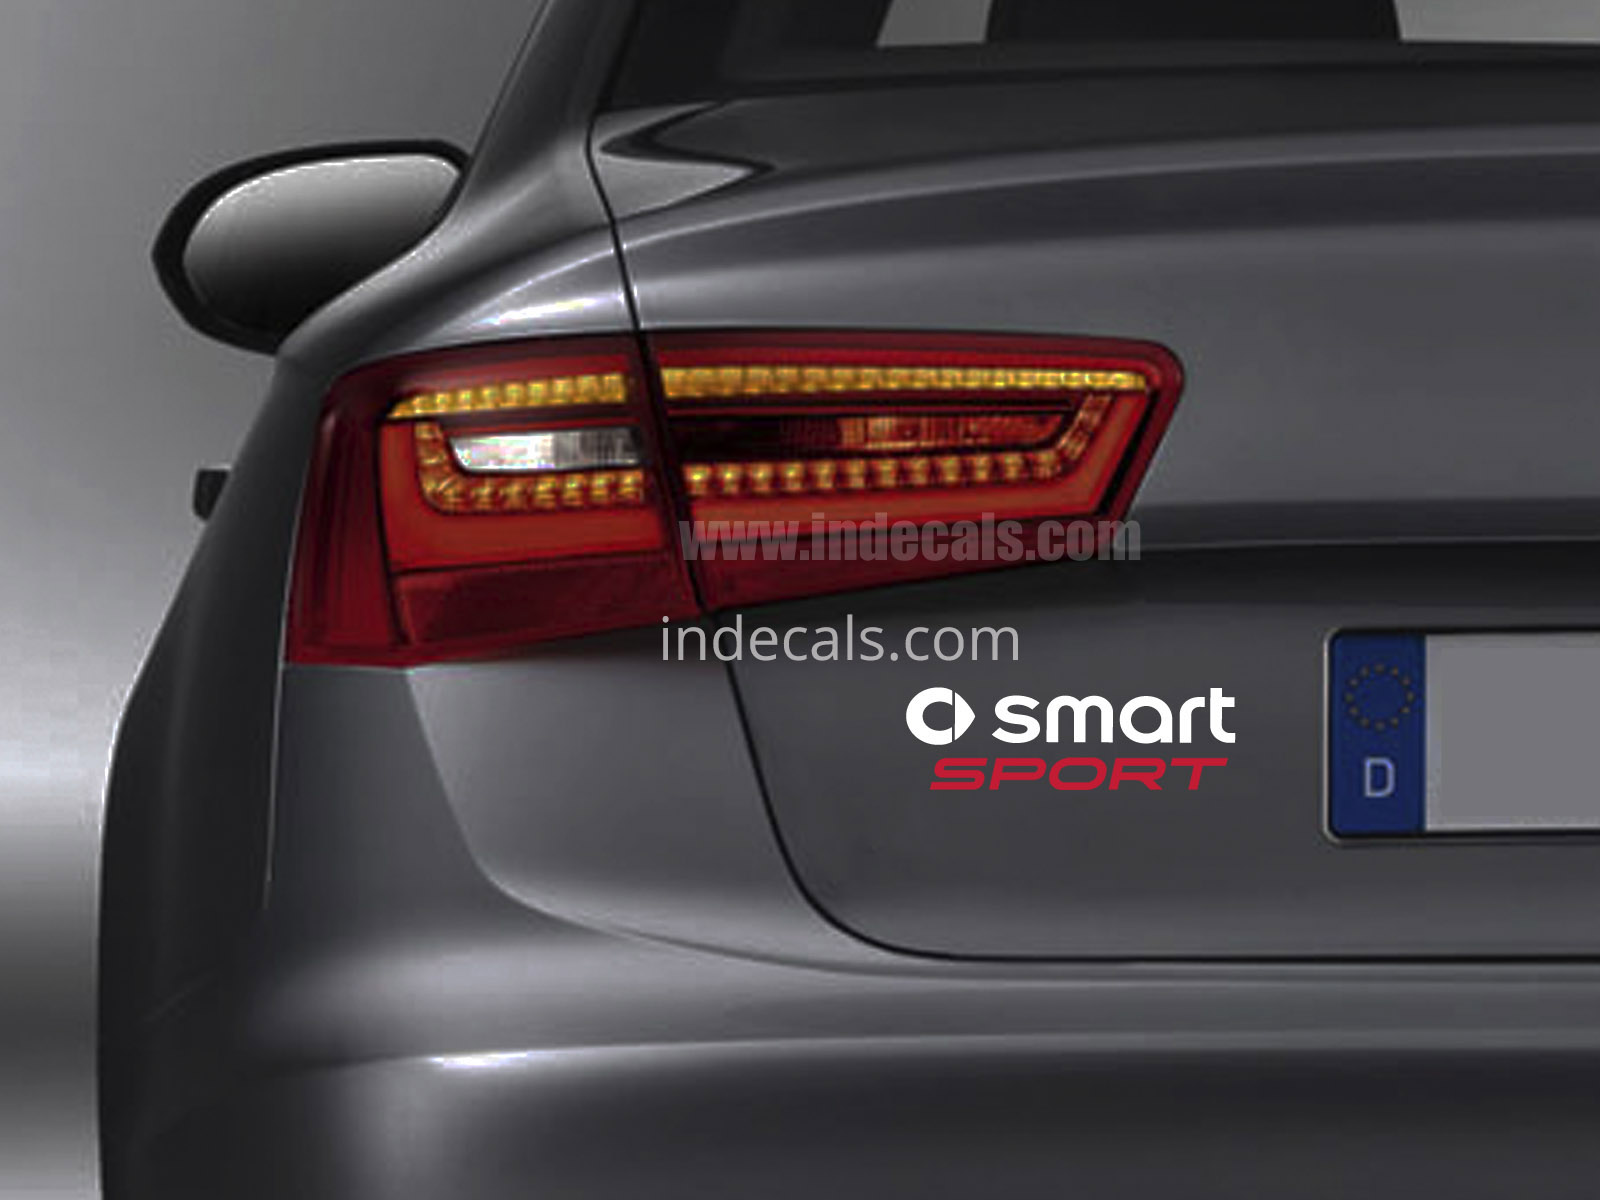 1 x Smart Sports Sticker for Trunk - White & Red